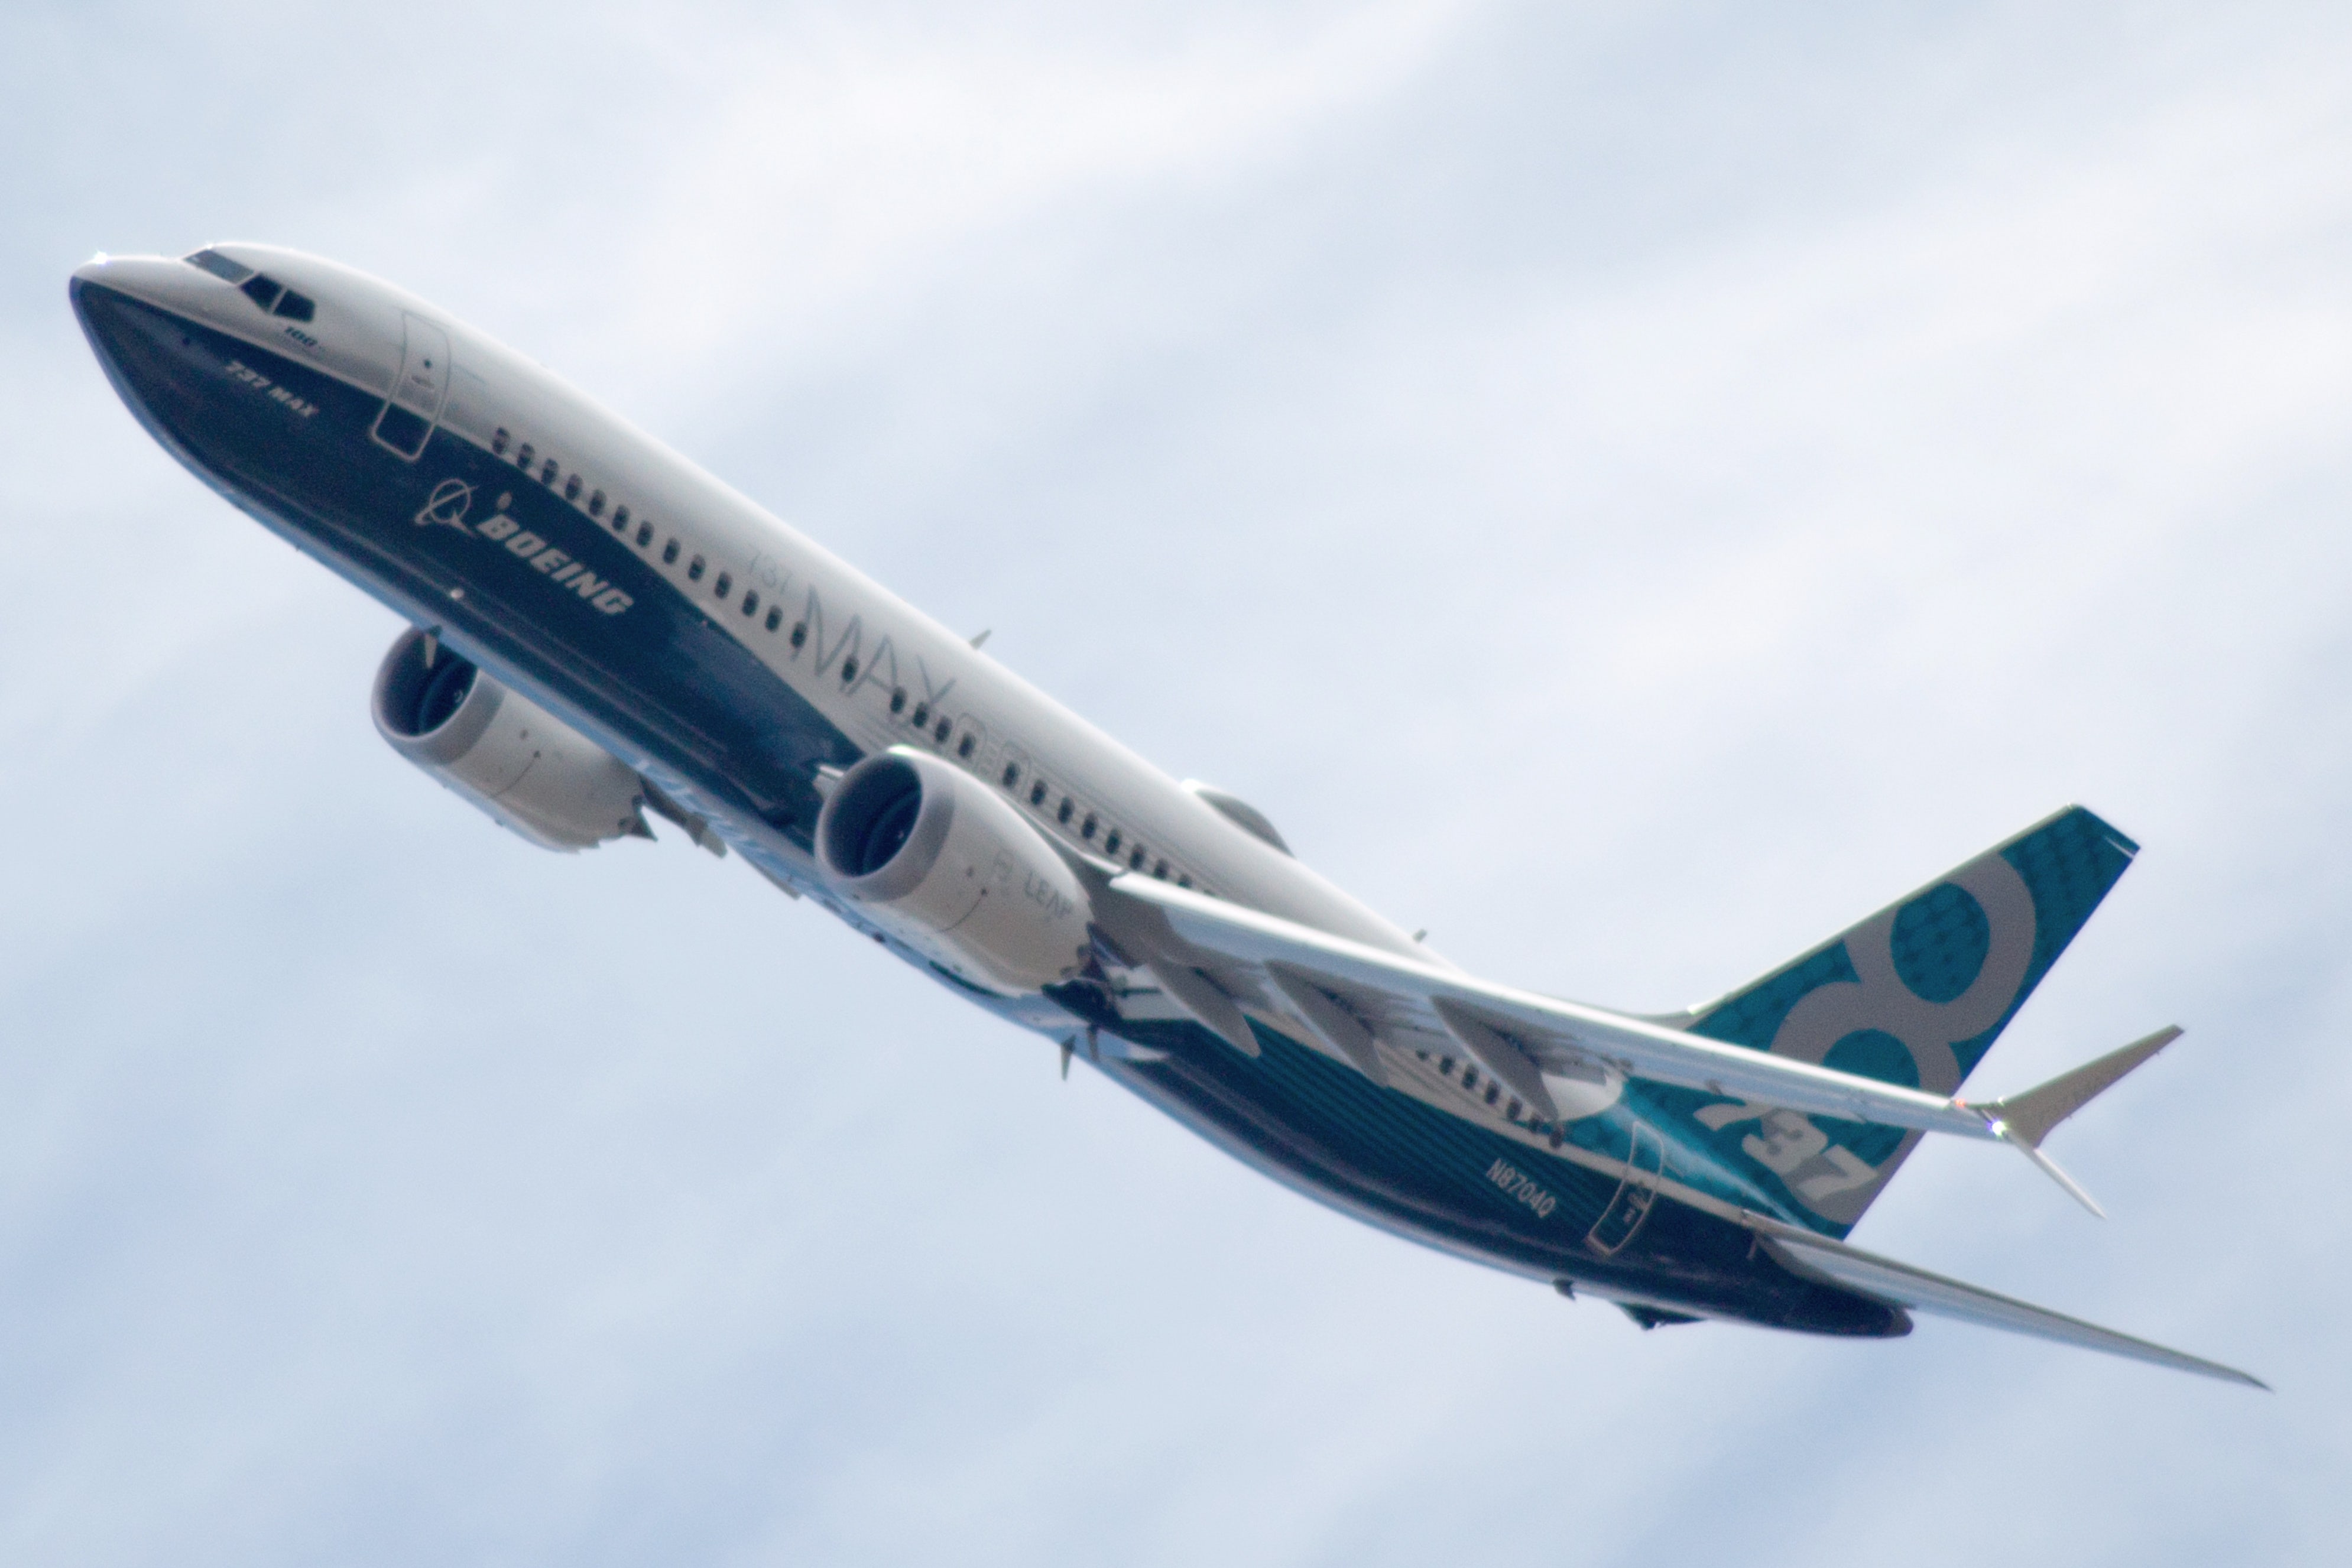 Benchmark Reduces Boeing Price Target By 20% - Read Why